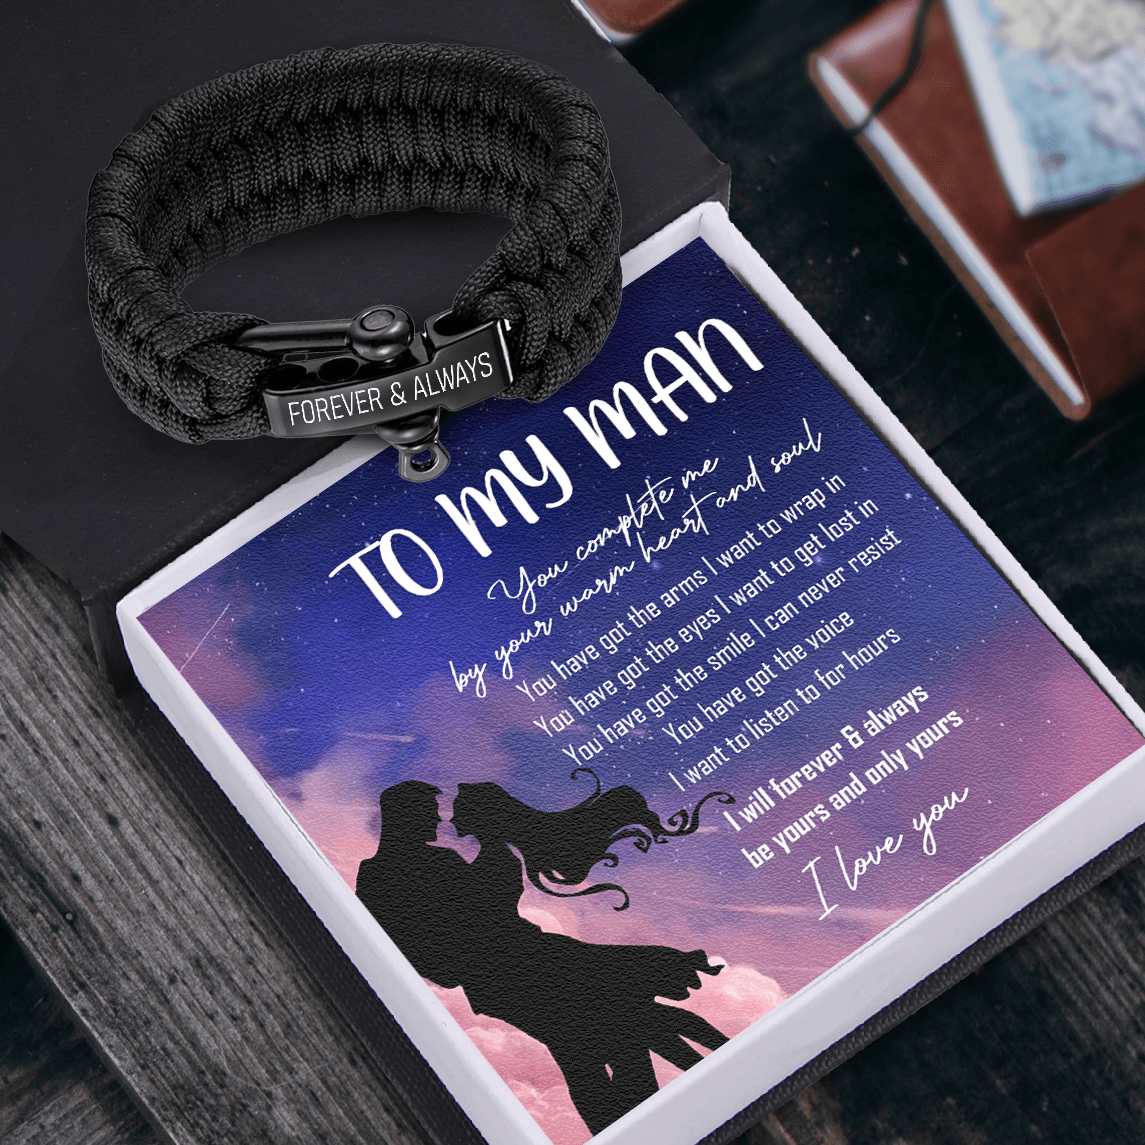 Paracord Rope Bracelet - Family - To My Man - I Will Forever & Always Be Yours And Only Yours - Augbxa26010 - Gifts Holder